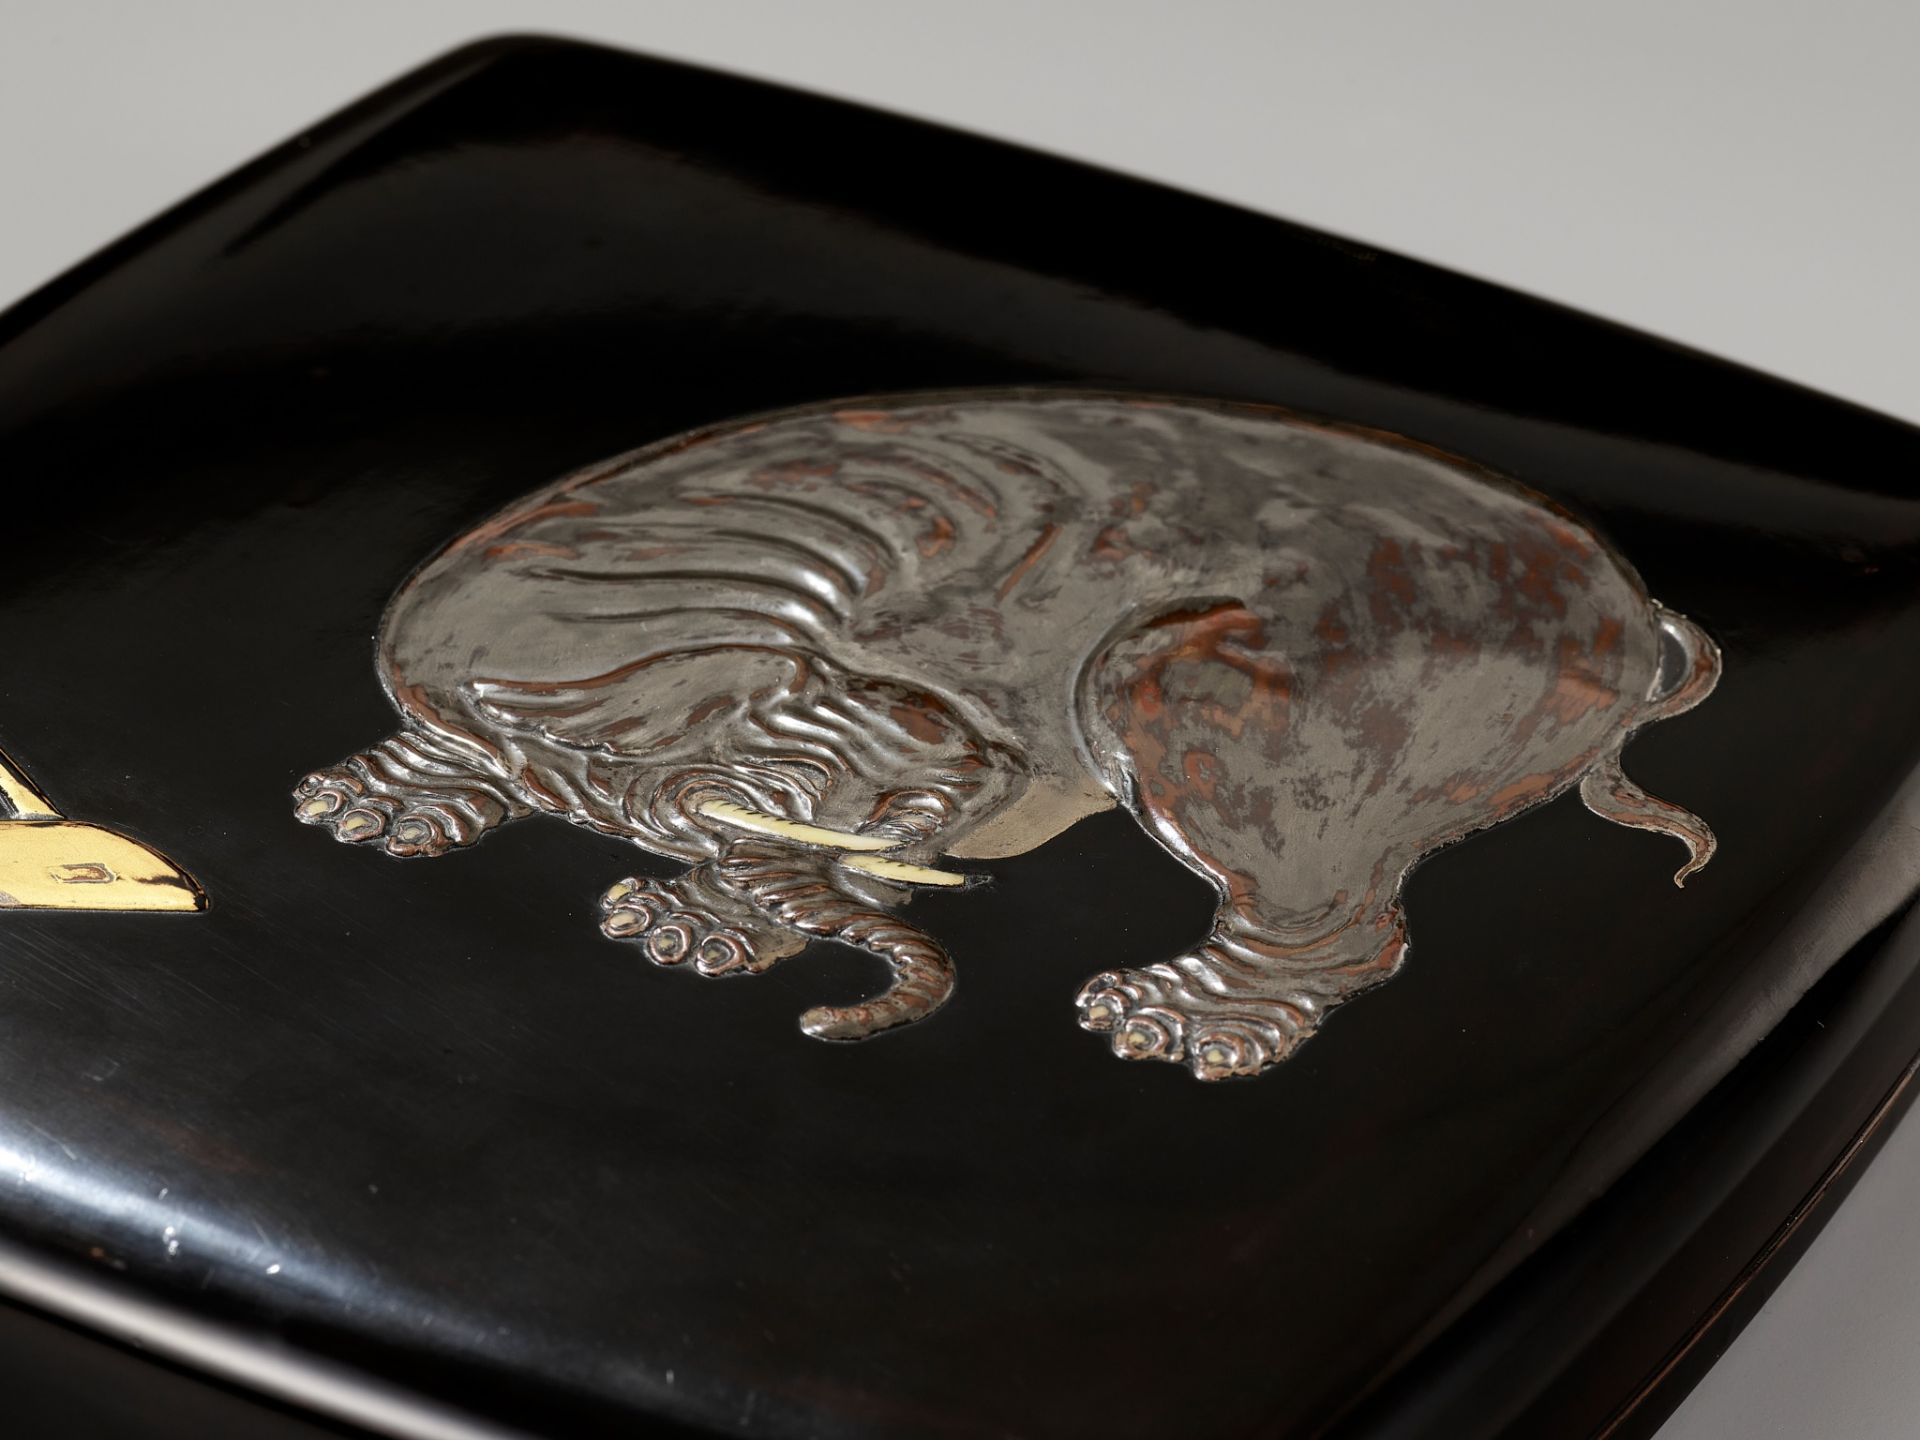 A SUPERB RITSUO-SCHOOL LACQUER AND CERAMIC-INLAID SUZURIBAKO DEPICTING AN ELEPHANT - Image 3 of 9